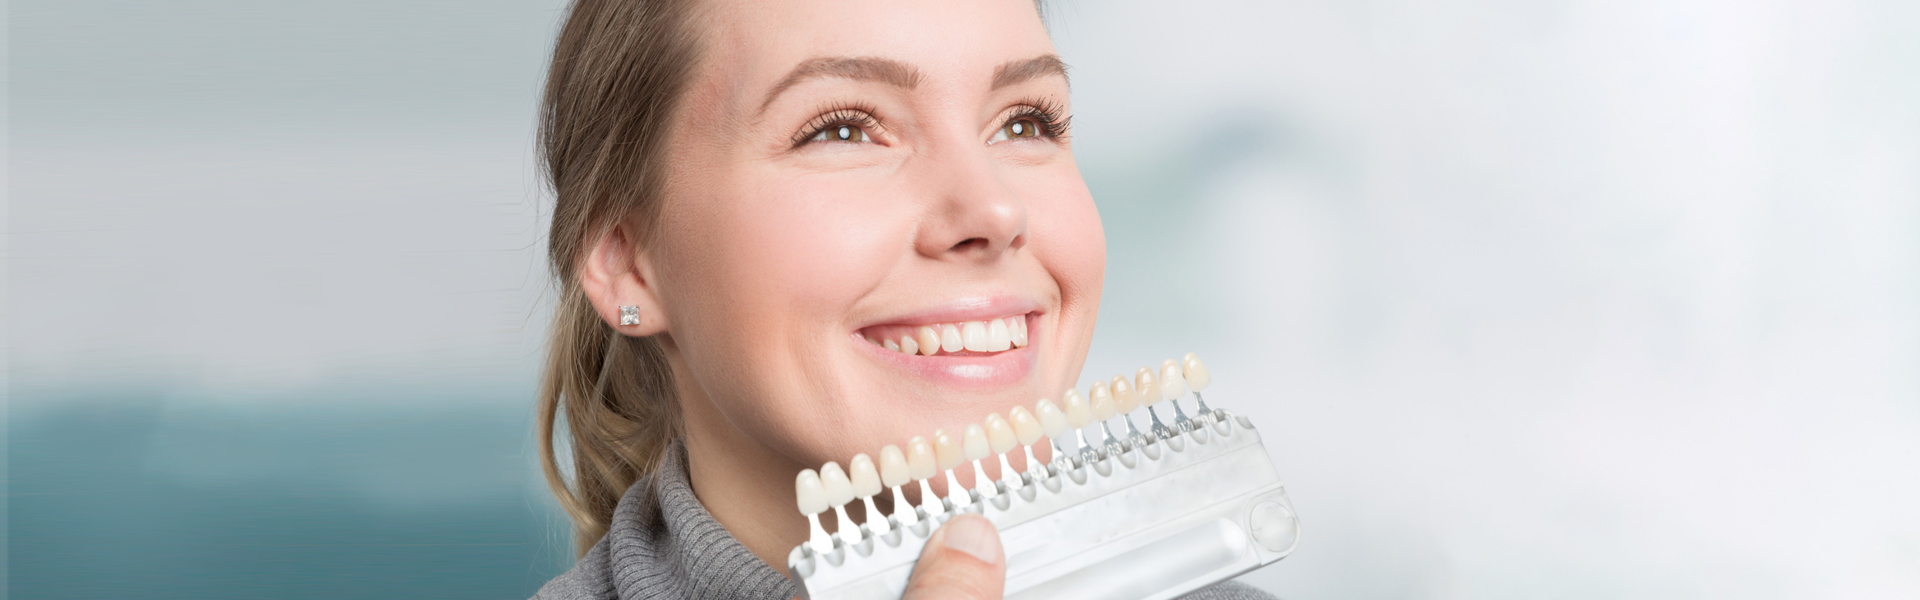 A Guide to Dental Veneers: Eligibility, Procedure, and Care